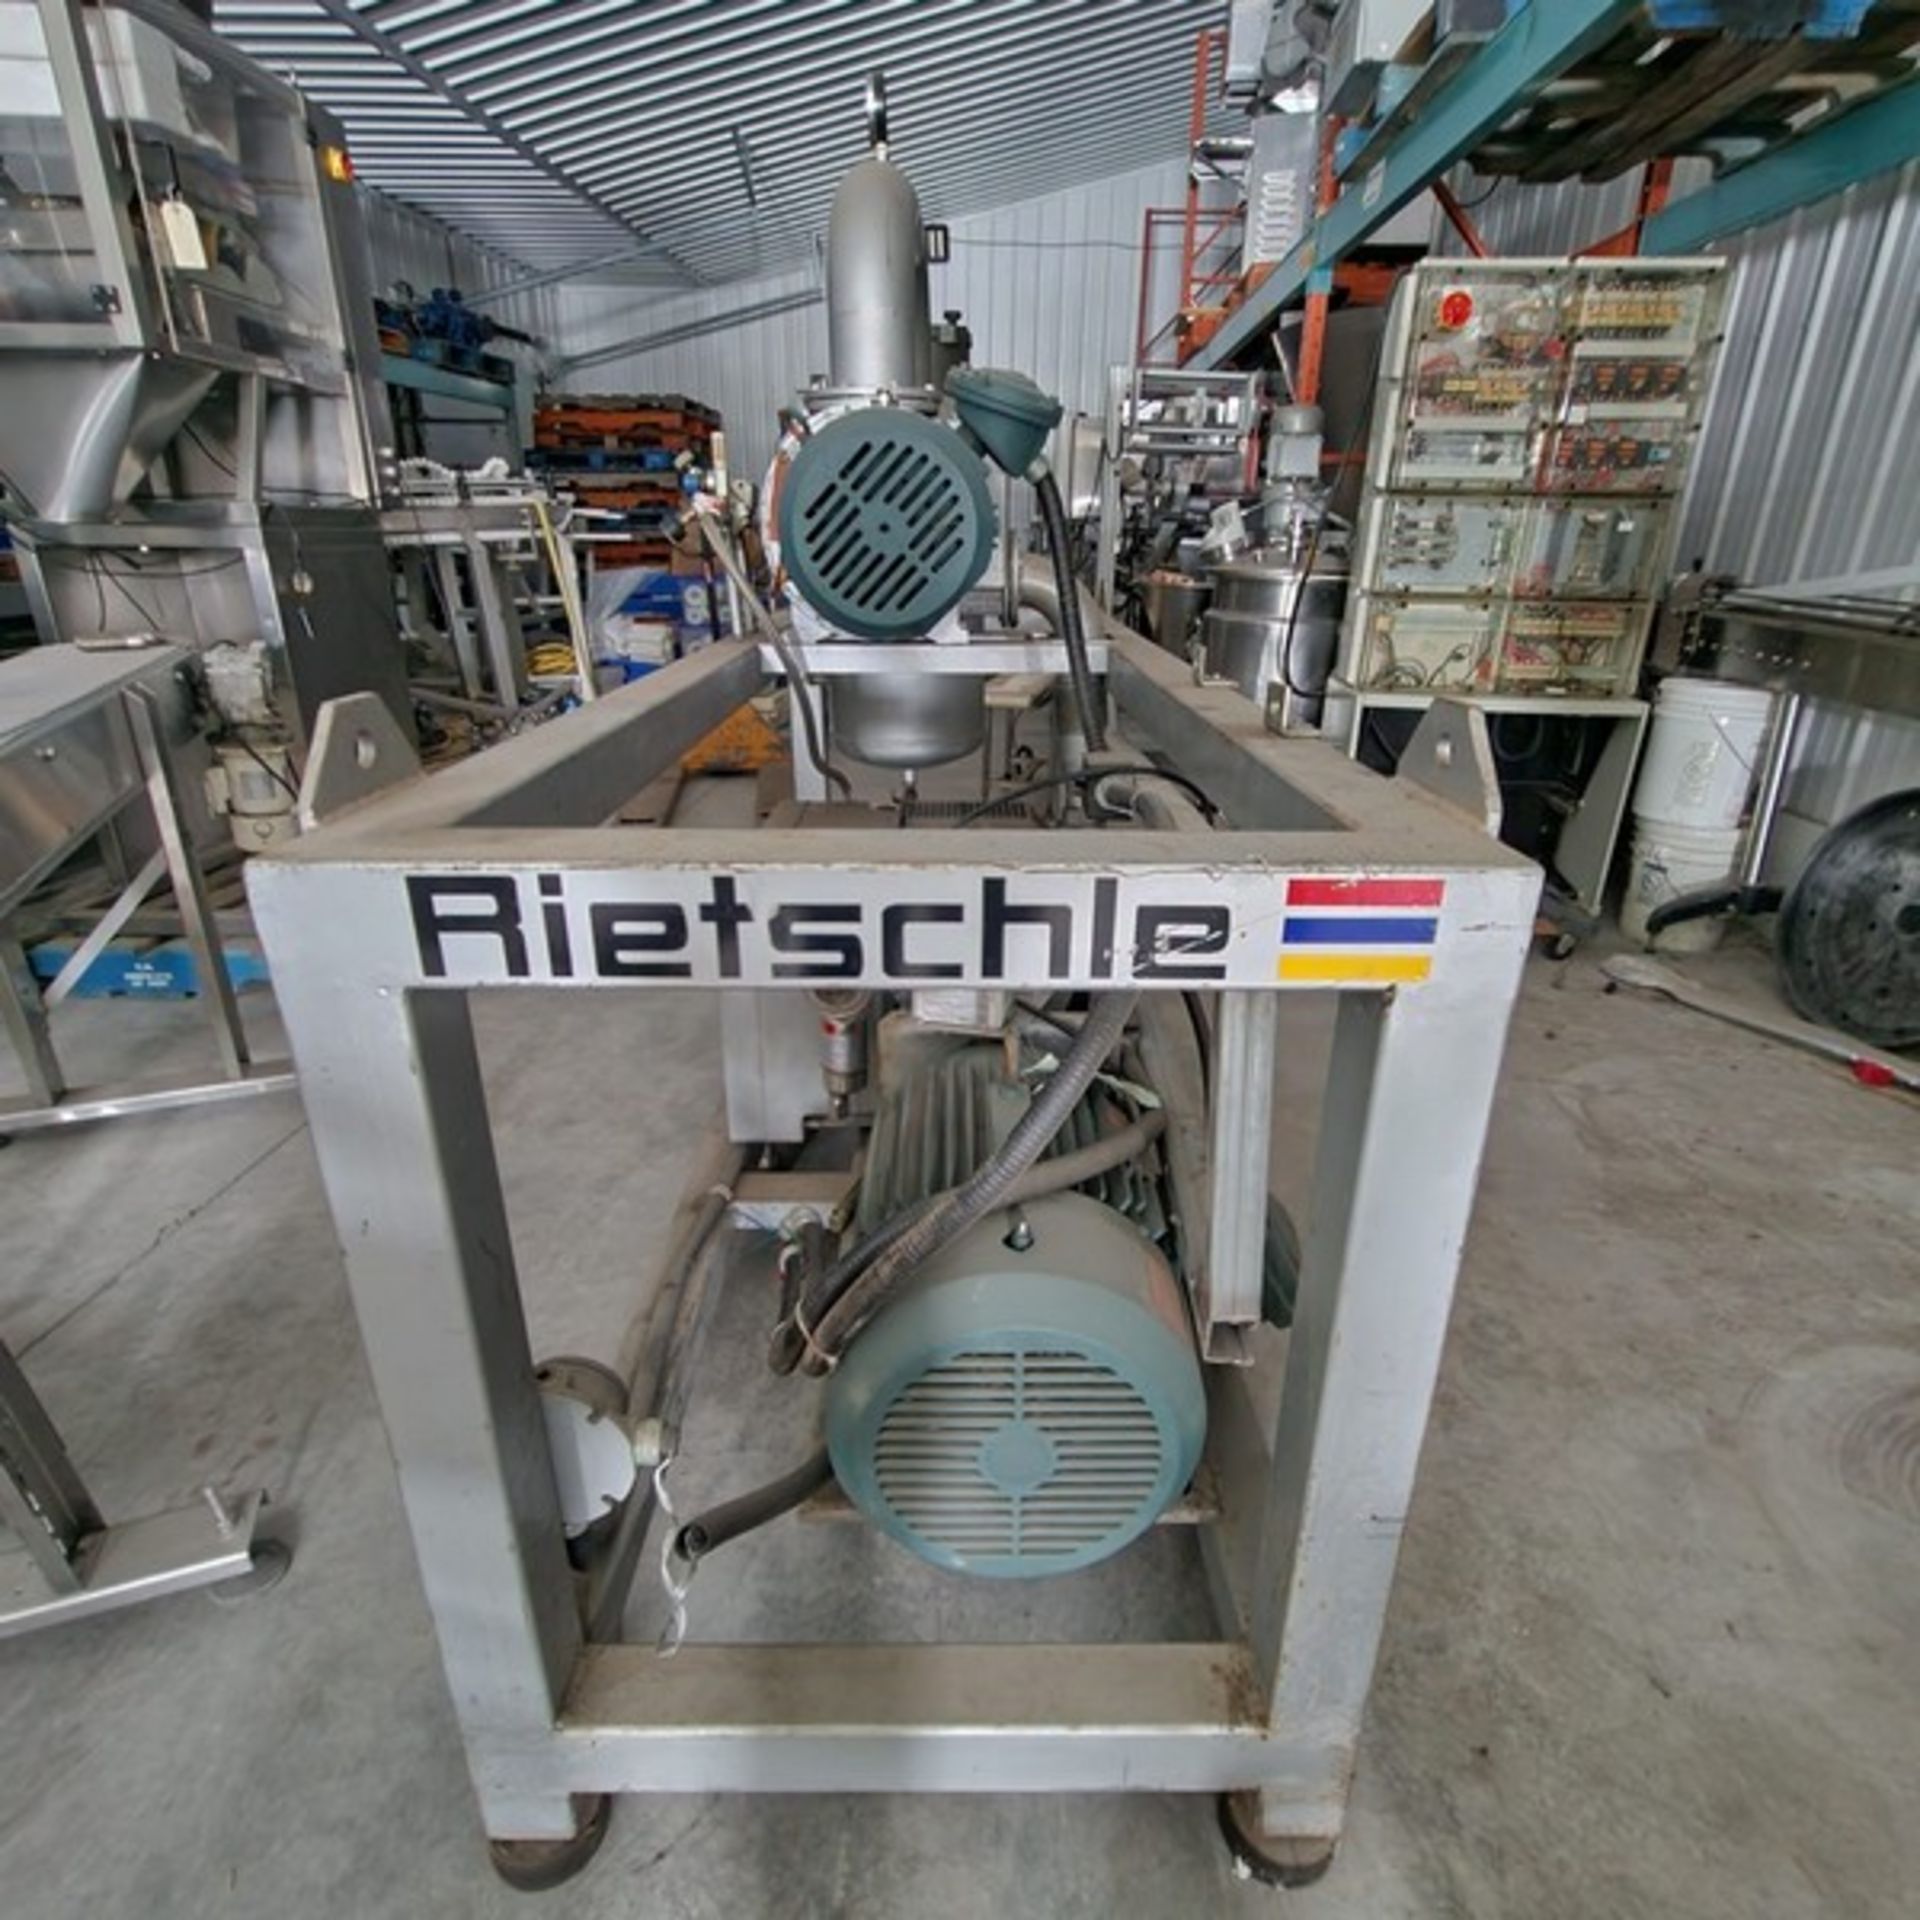 Rietschle Vacuum System modele VC300 01, 02567-0113 TYPE 1000 575volts / 5.20 / 3PH /60Hz 1 / SF 1, - Image 2 of 11